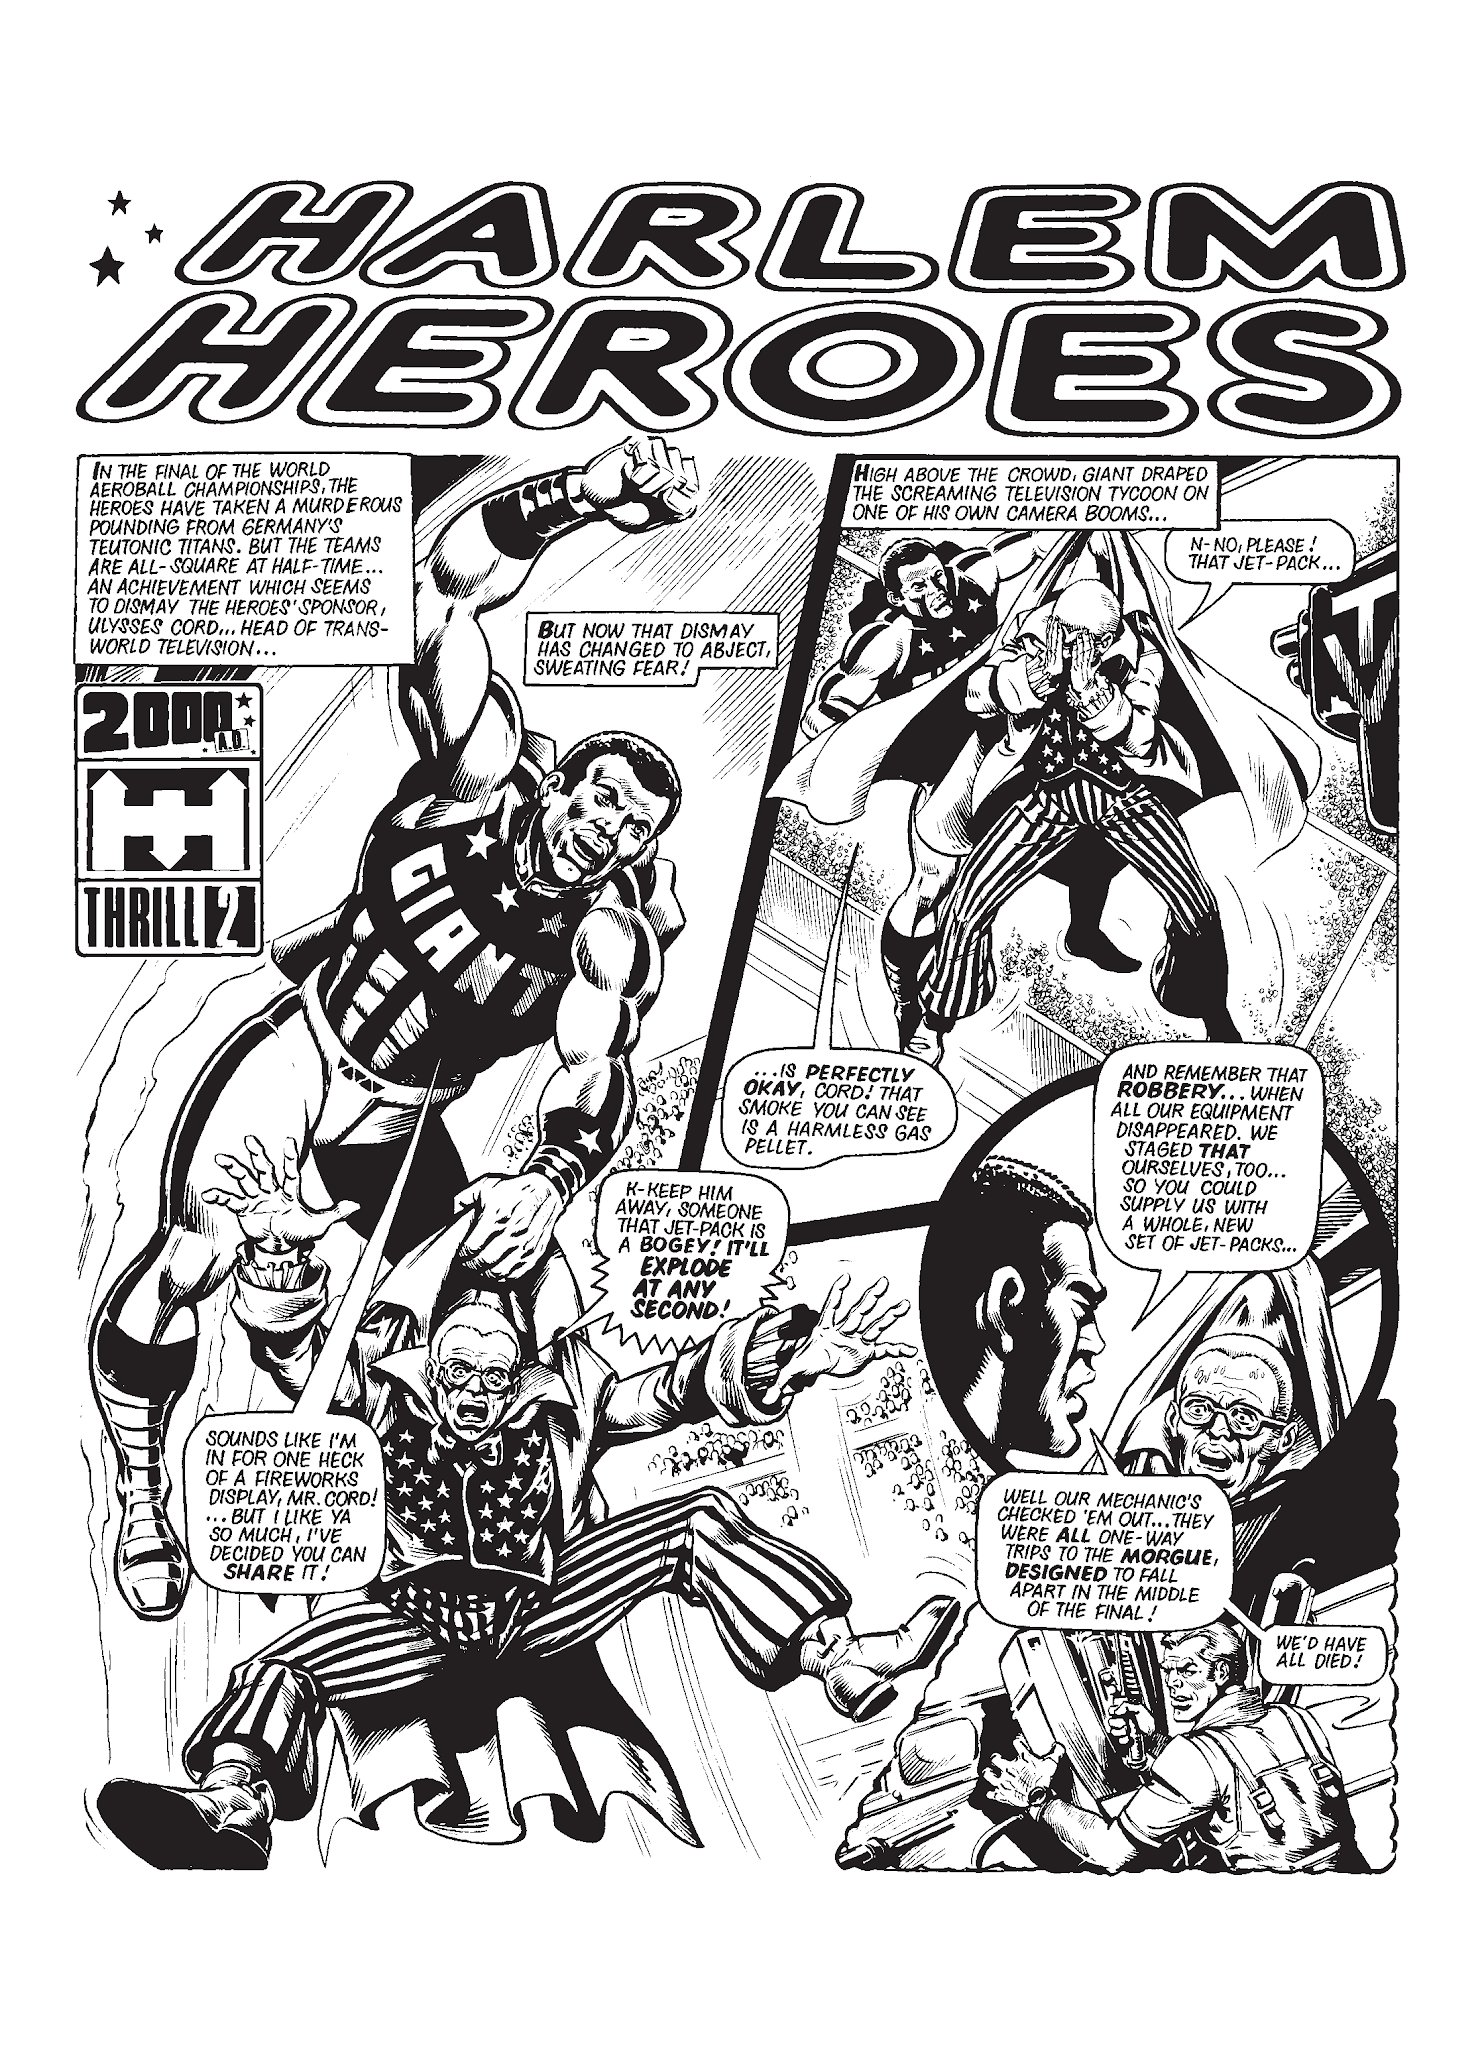 Read online The Complete Harlem Heroes comic -  Issue # TPB - 113